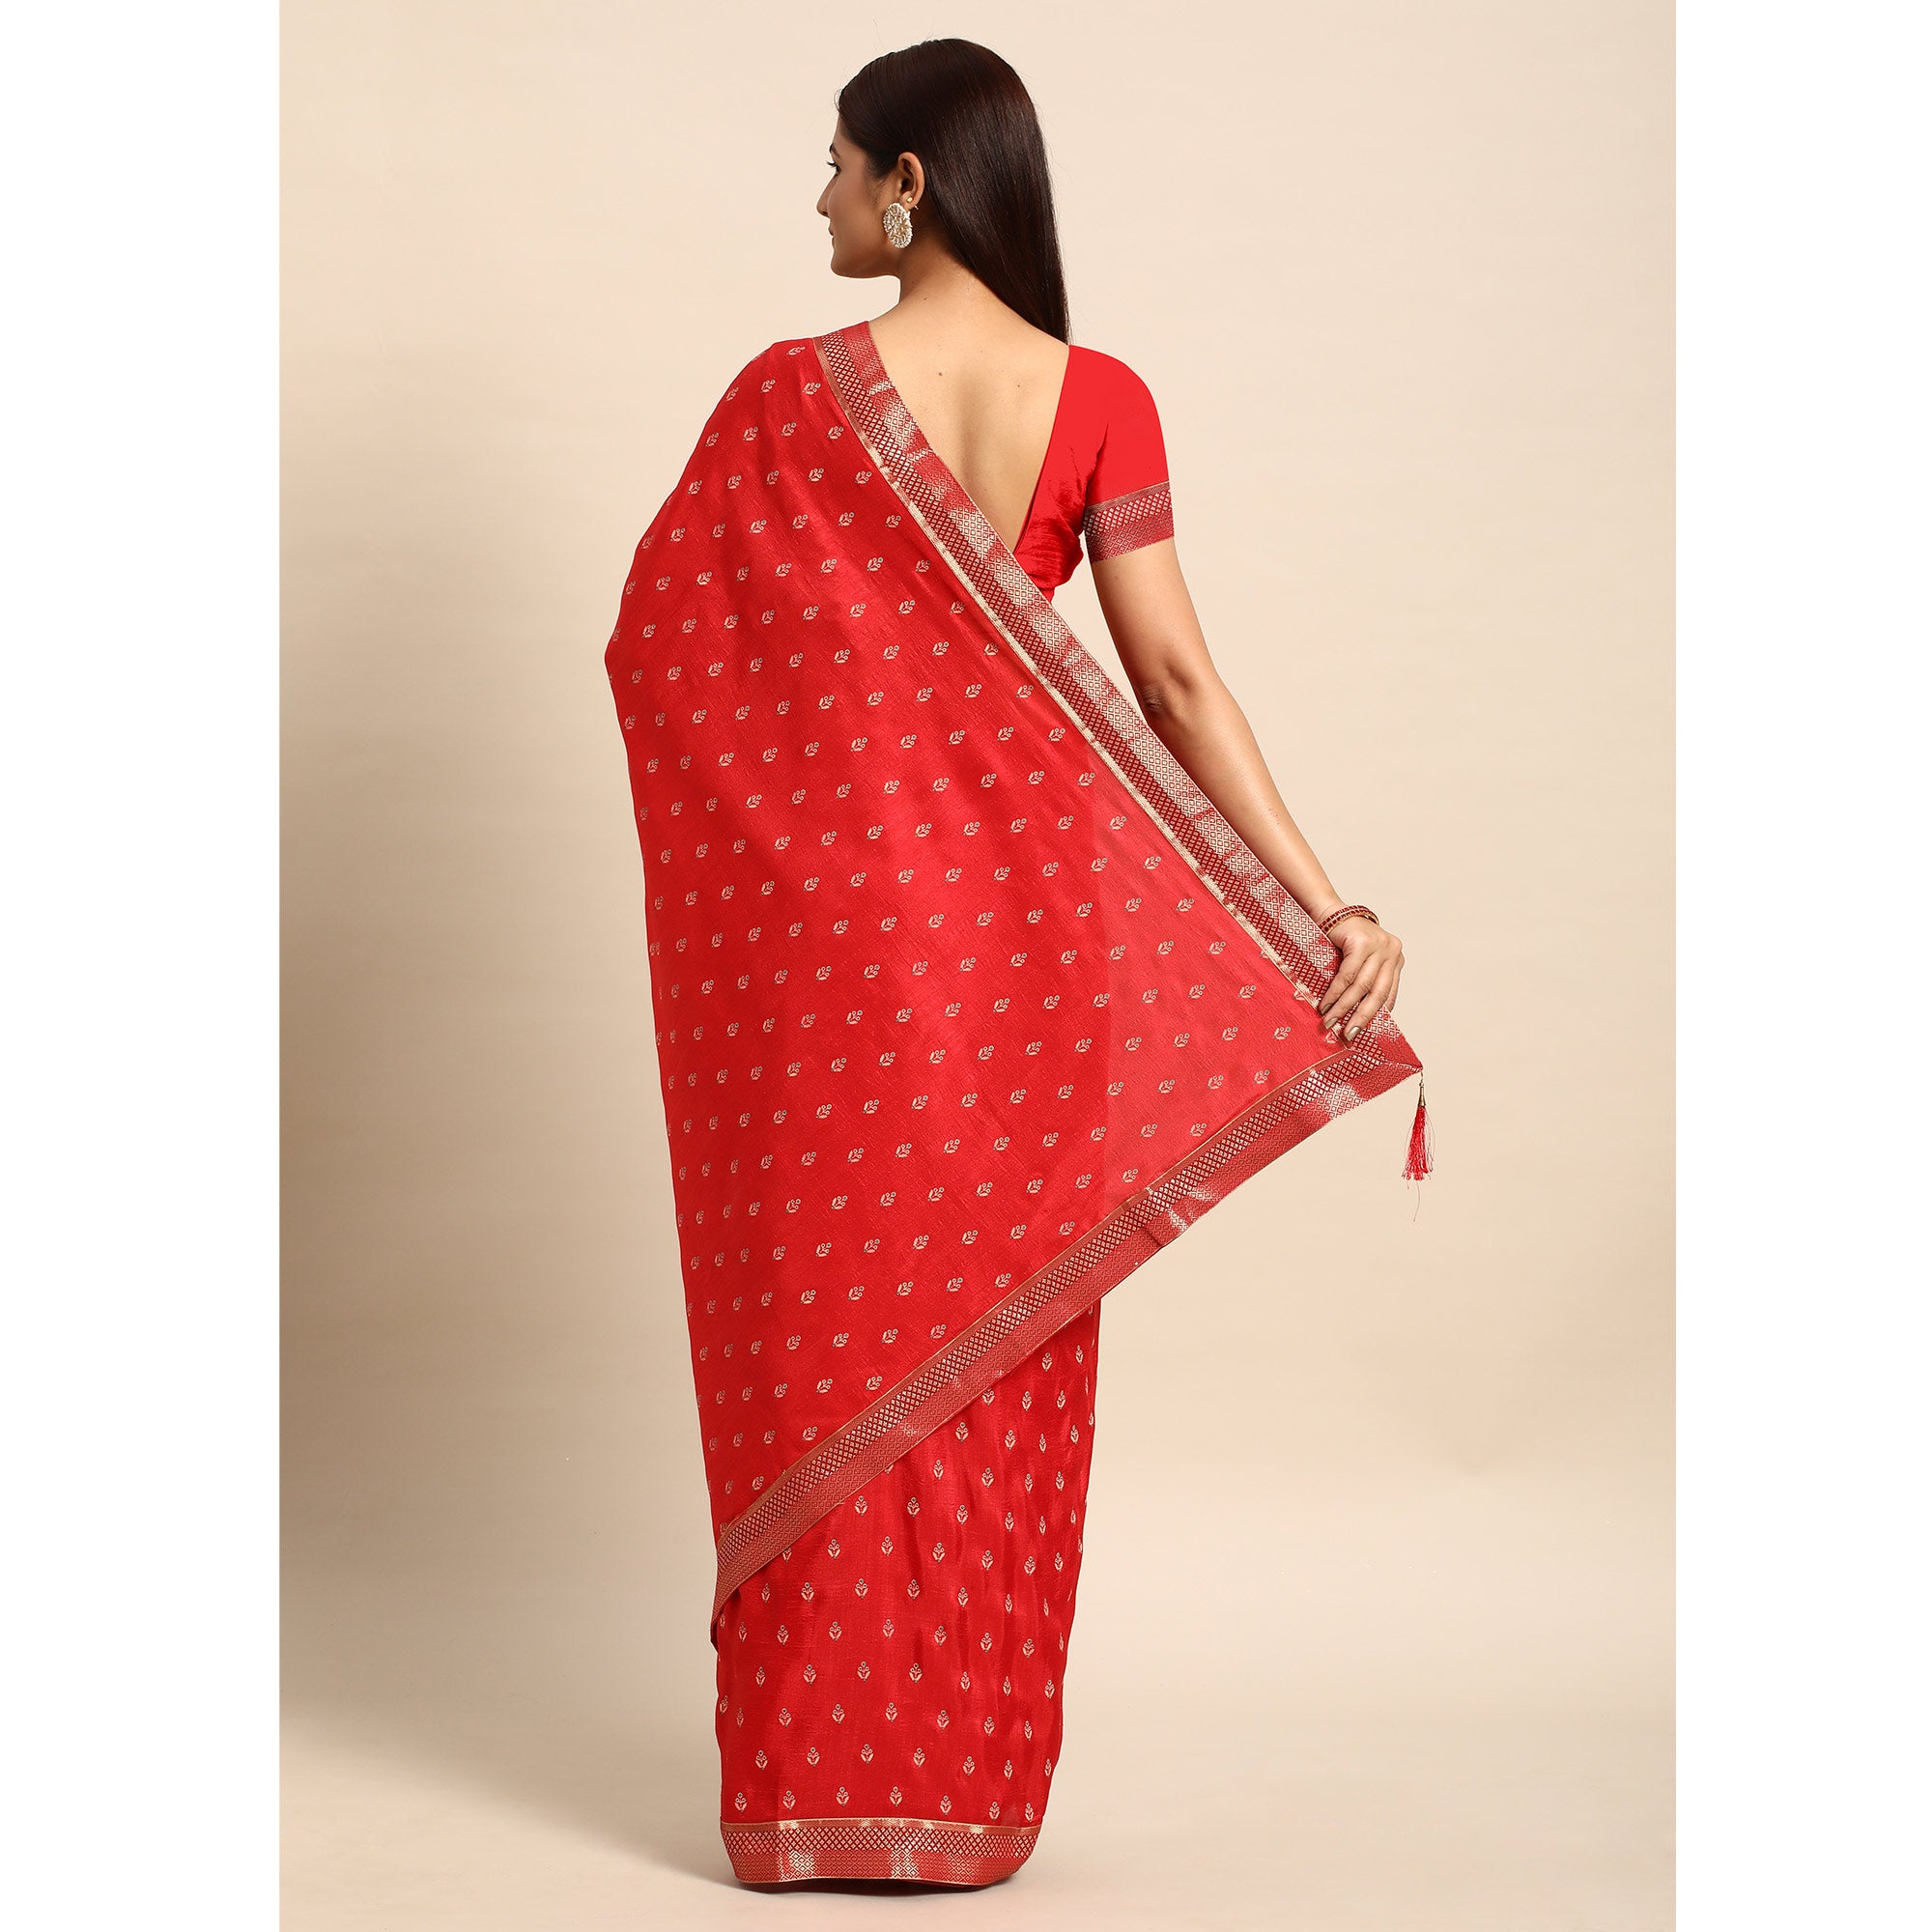 Red Floral Printed Vichitra Silk Saree With Tassels